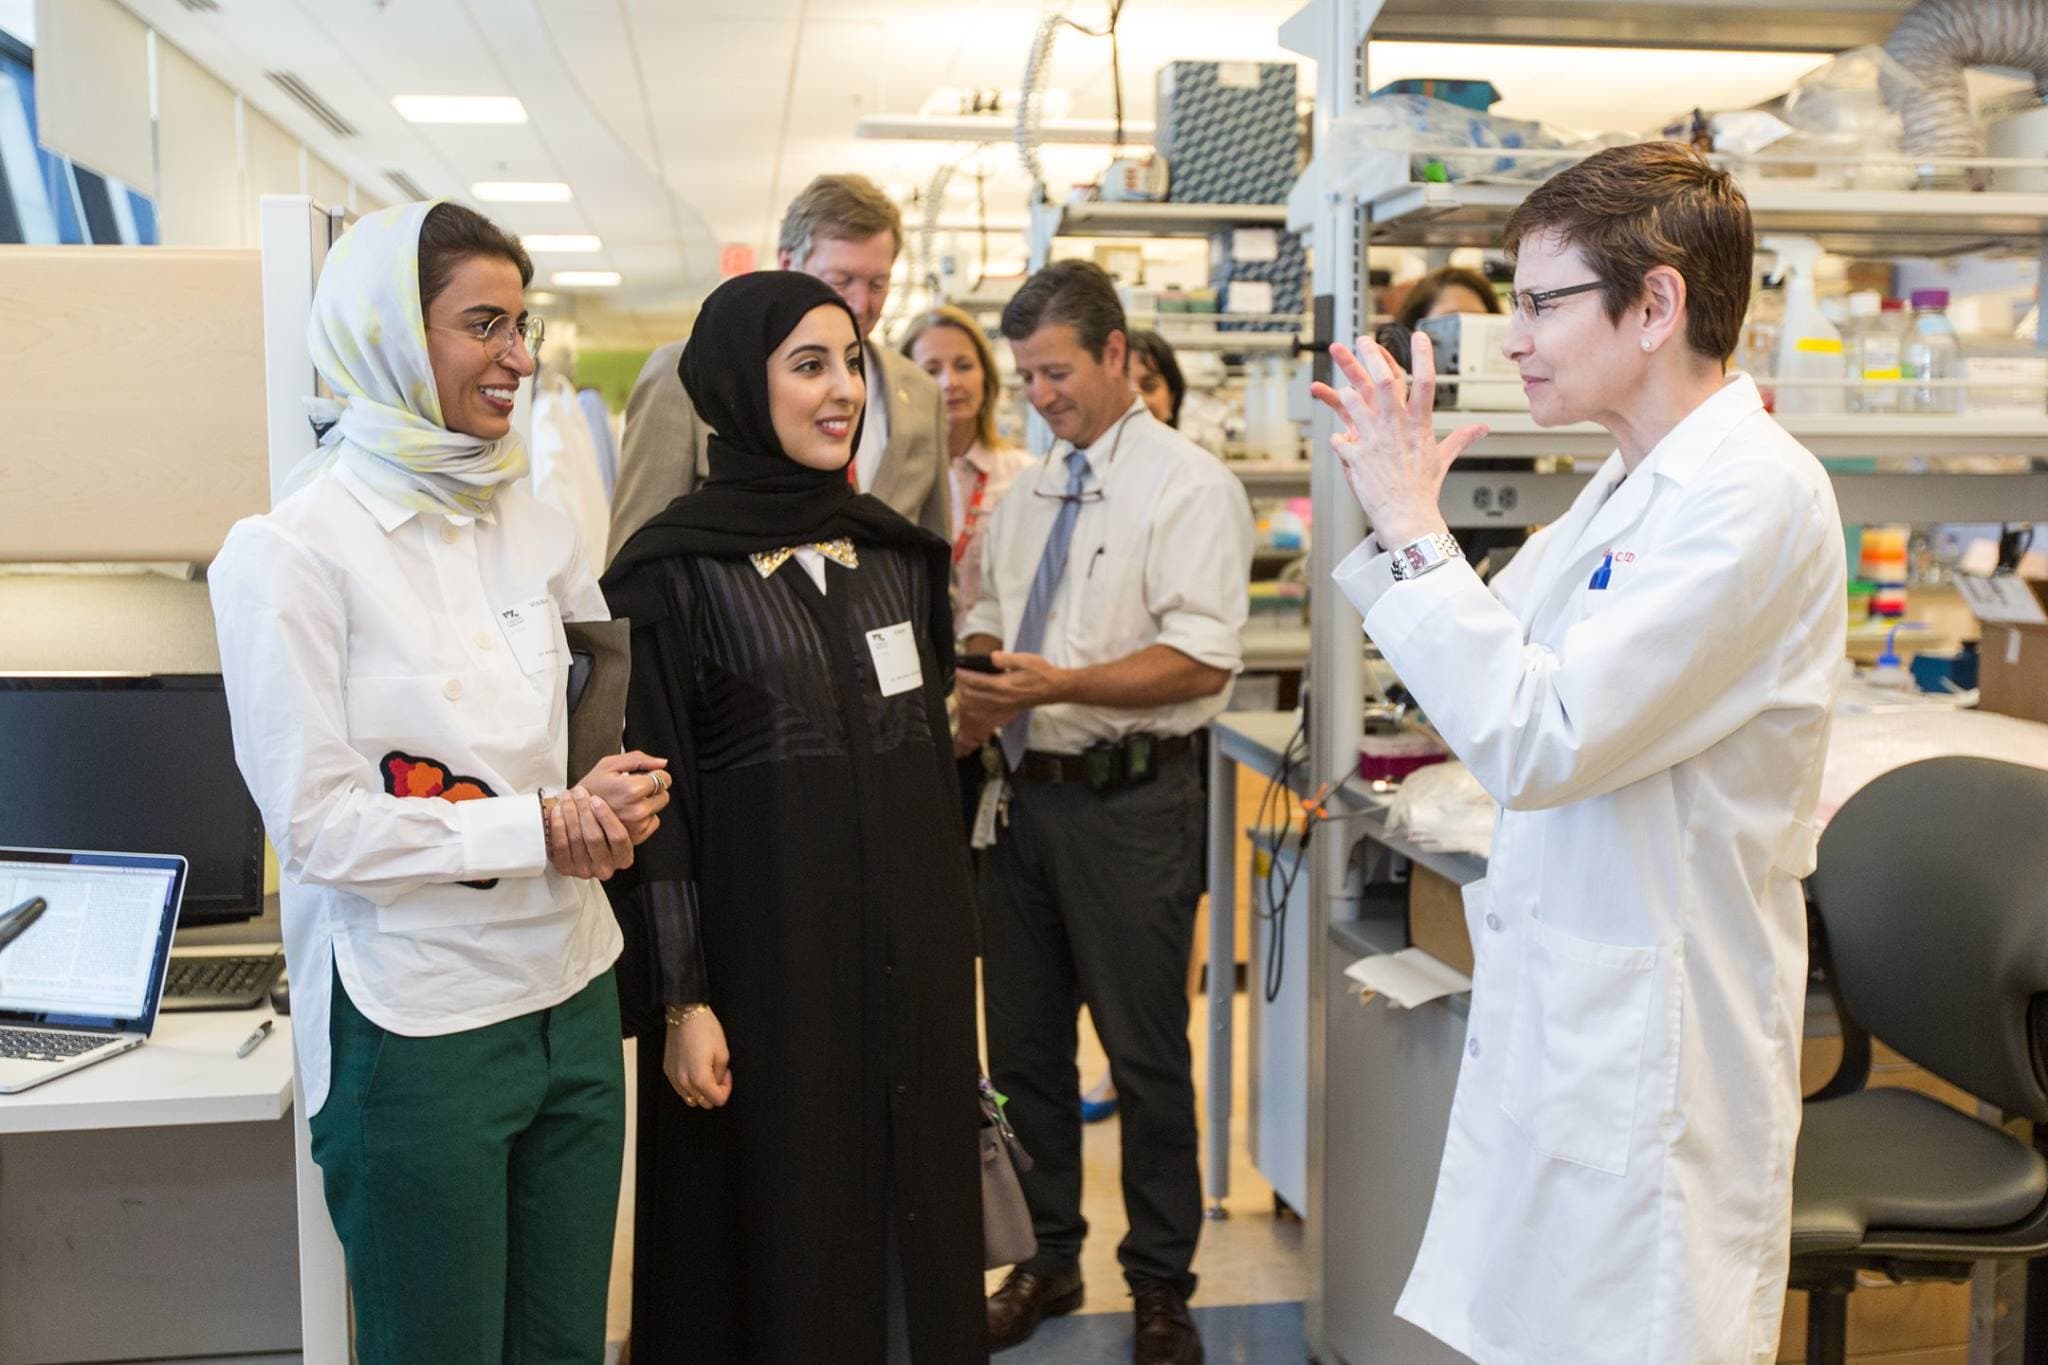 Honored to welcome Their Excellencies; Minister of State for Federal National Council Affairs, Noura Al Kaabi and Minister of State for Youth Affairs, Shamma Al Mazrui to Washington, DC. Their first stop was a tour of the Sheikh Zayed Institute for Pediatric Innovation at Children’s National Medical Center, visiting with UAE patients and families, meeting Emirati doctors in residency and gaining a deeper understanding of how the close working partnership with Children’s National and the United Arab Emirates